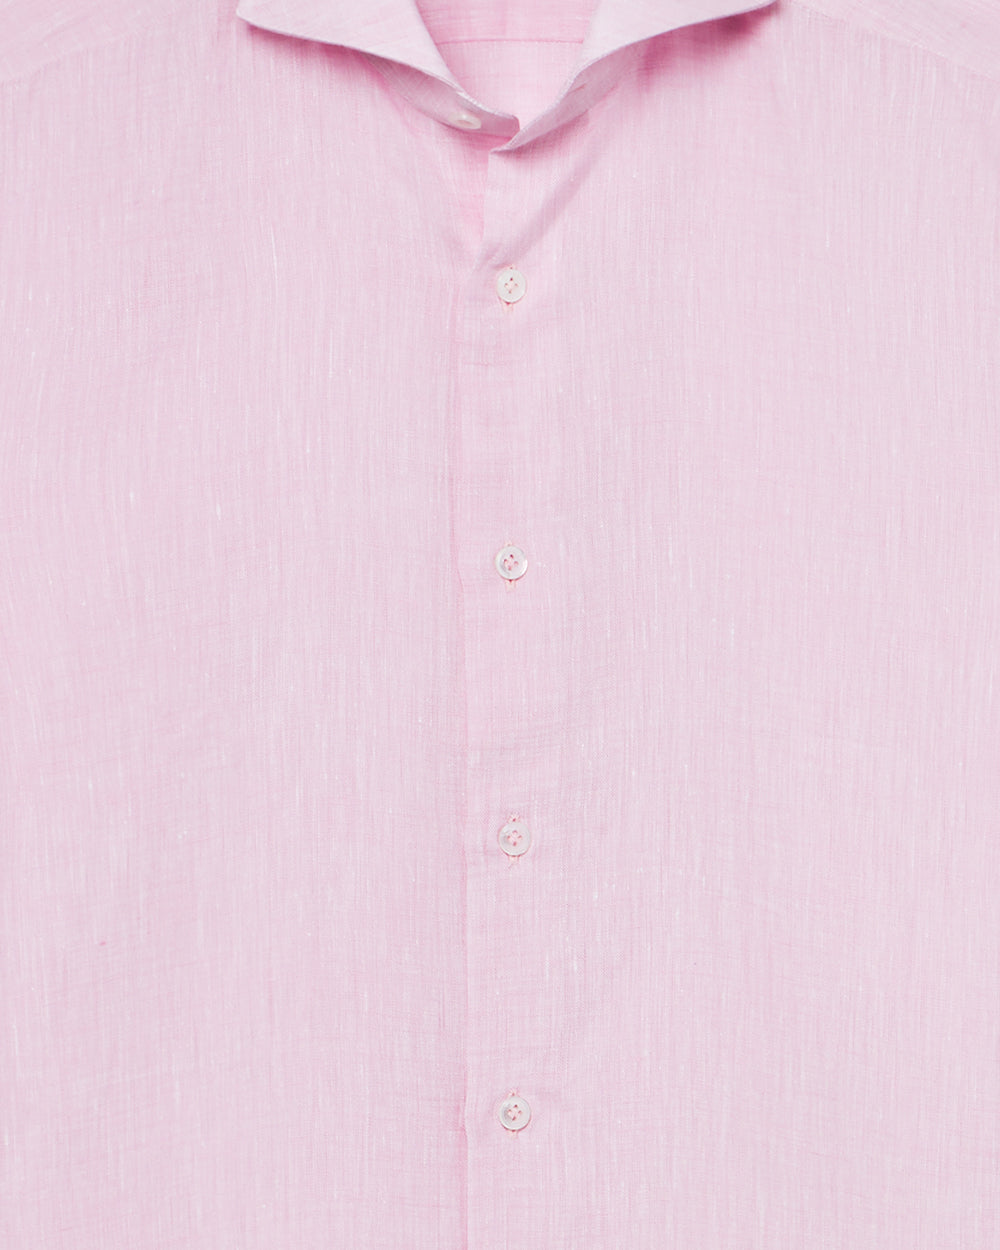 Pearson Linen Shirt in pink.